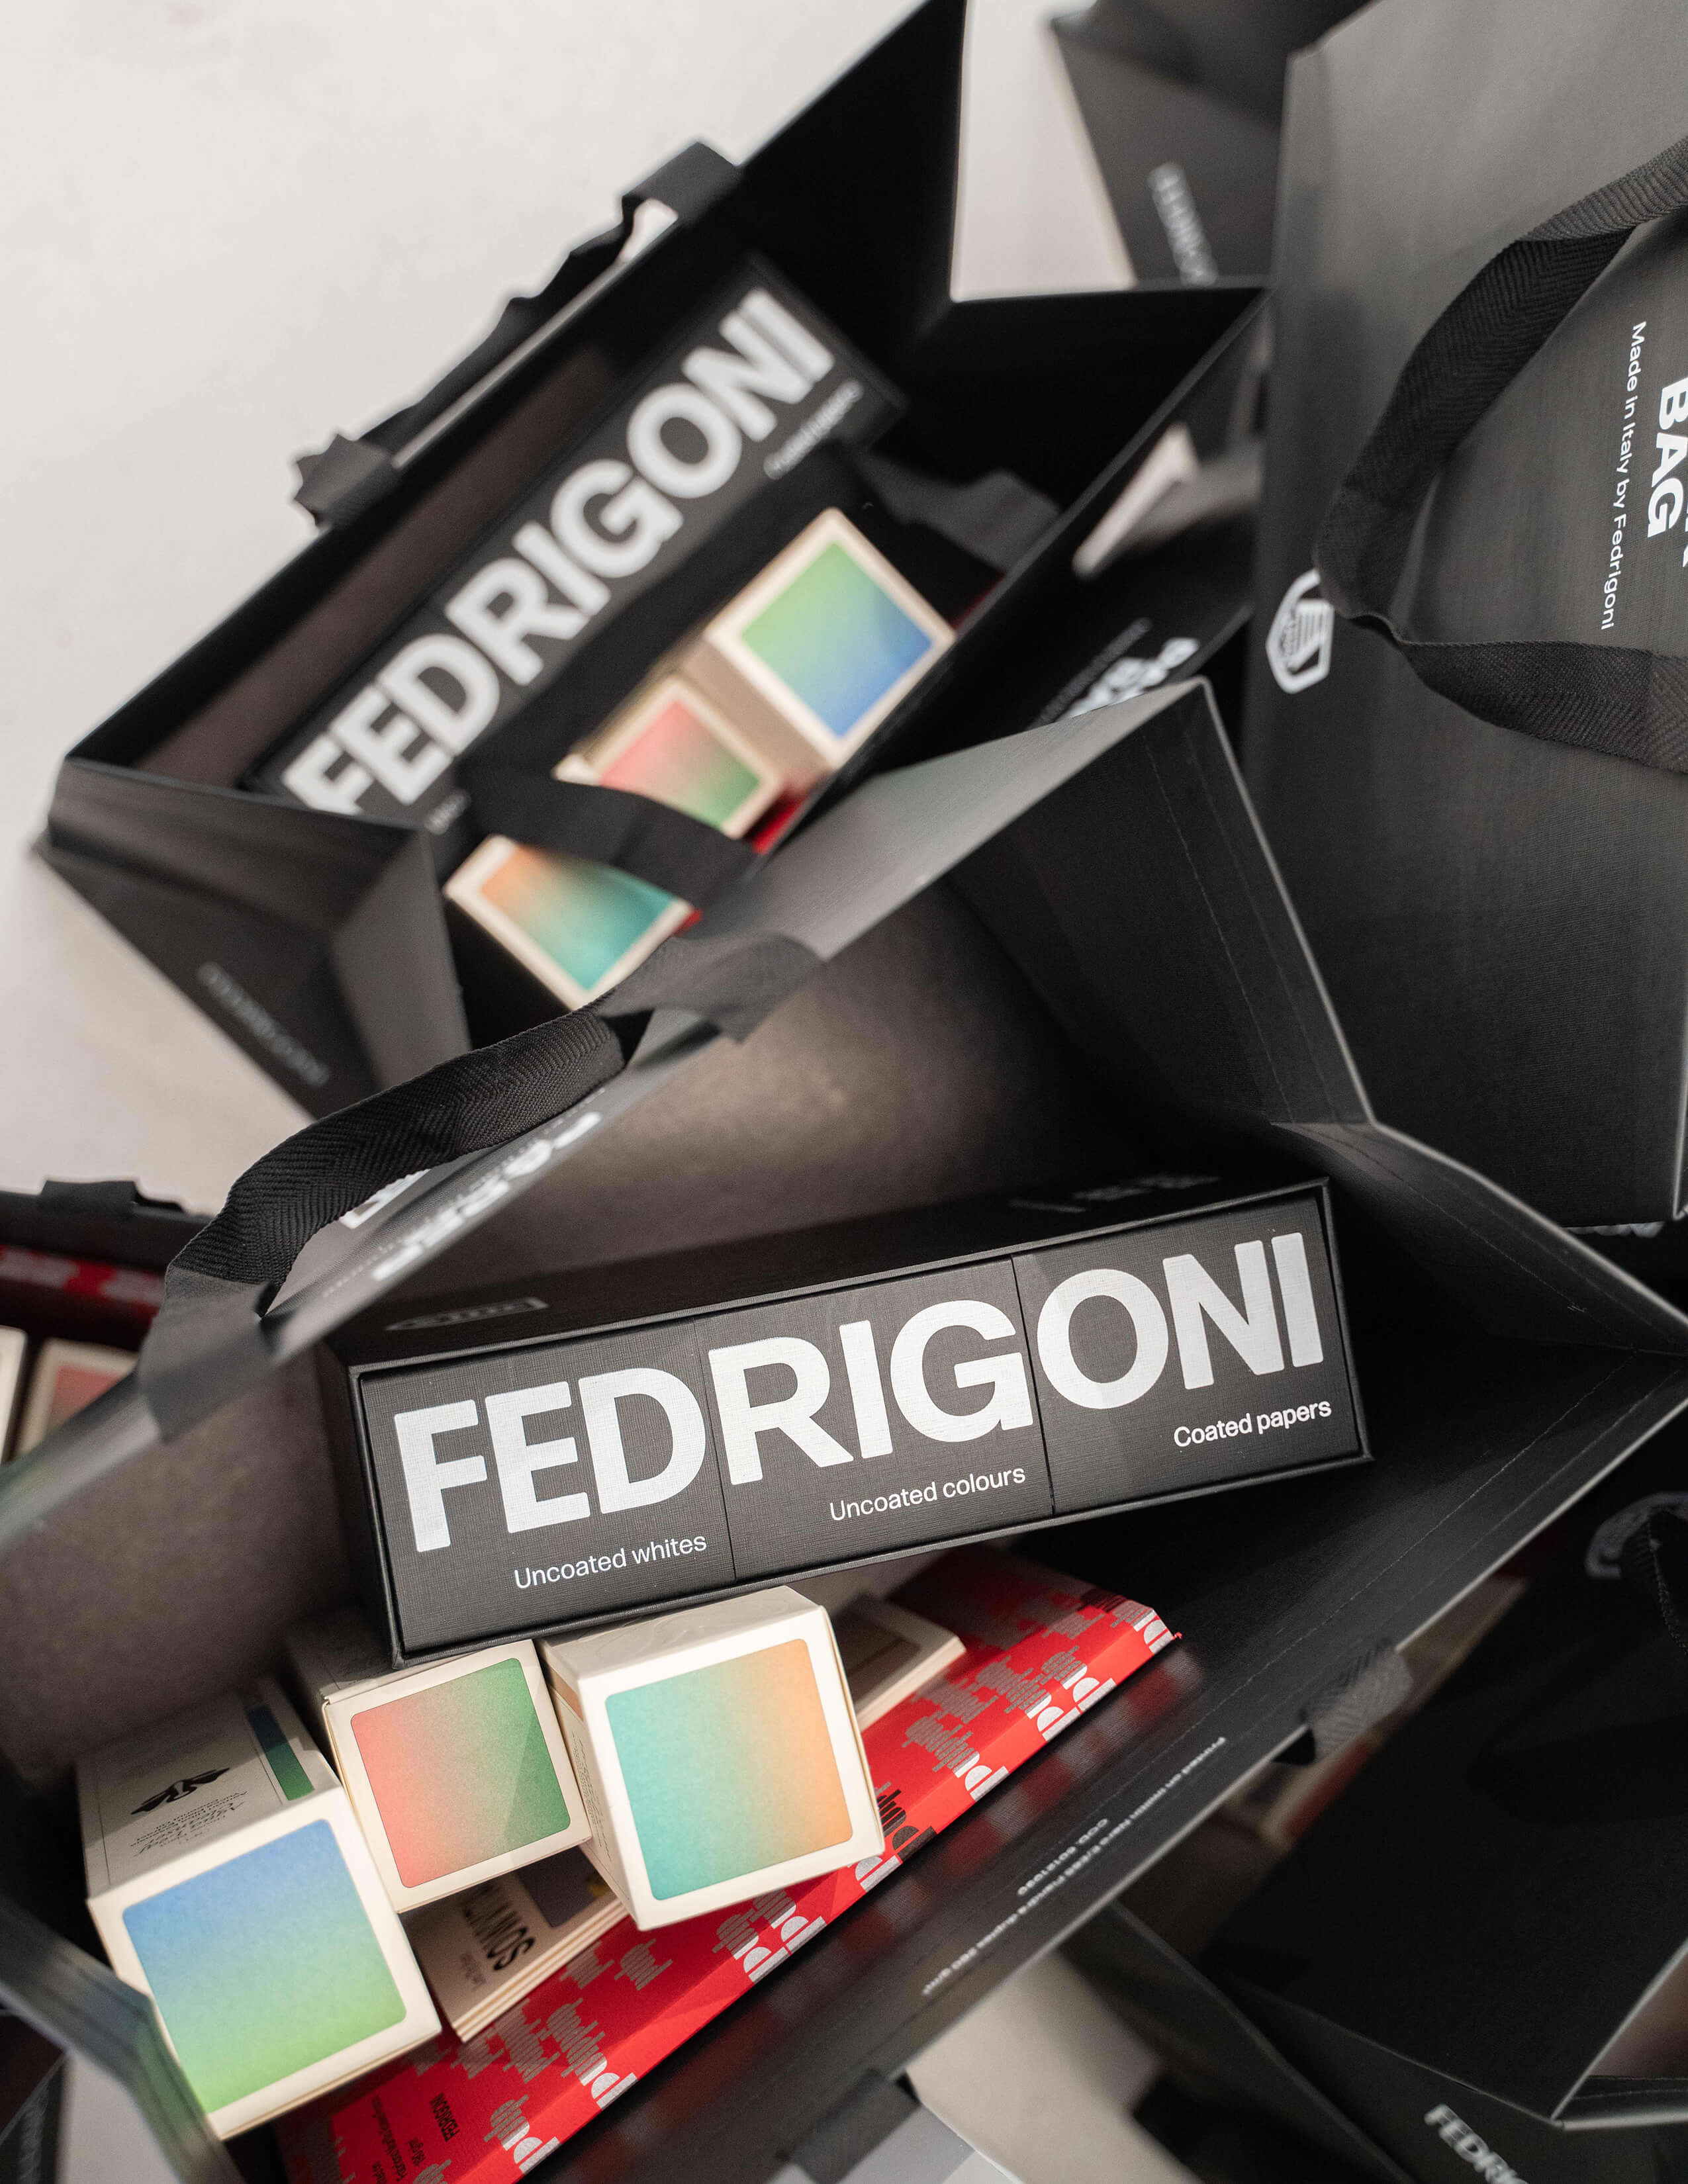 Fedrigoni’s uncoated, coated, coloured paper contents with the Sowvital products’ packaging in black bags.